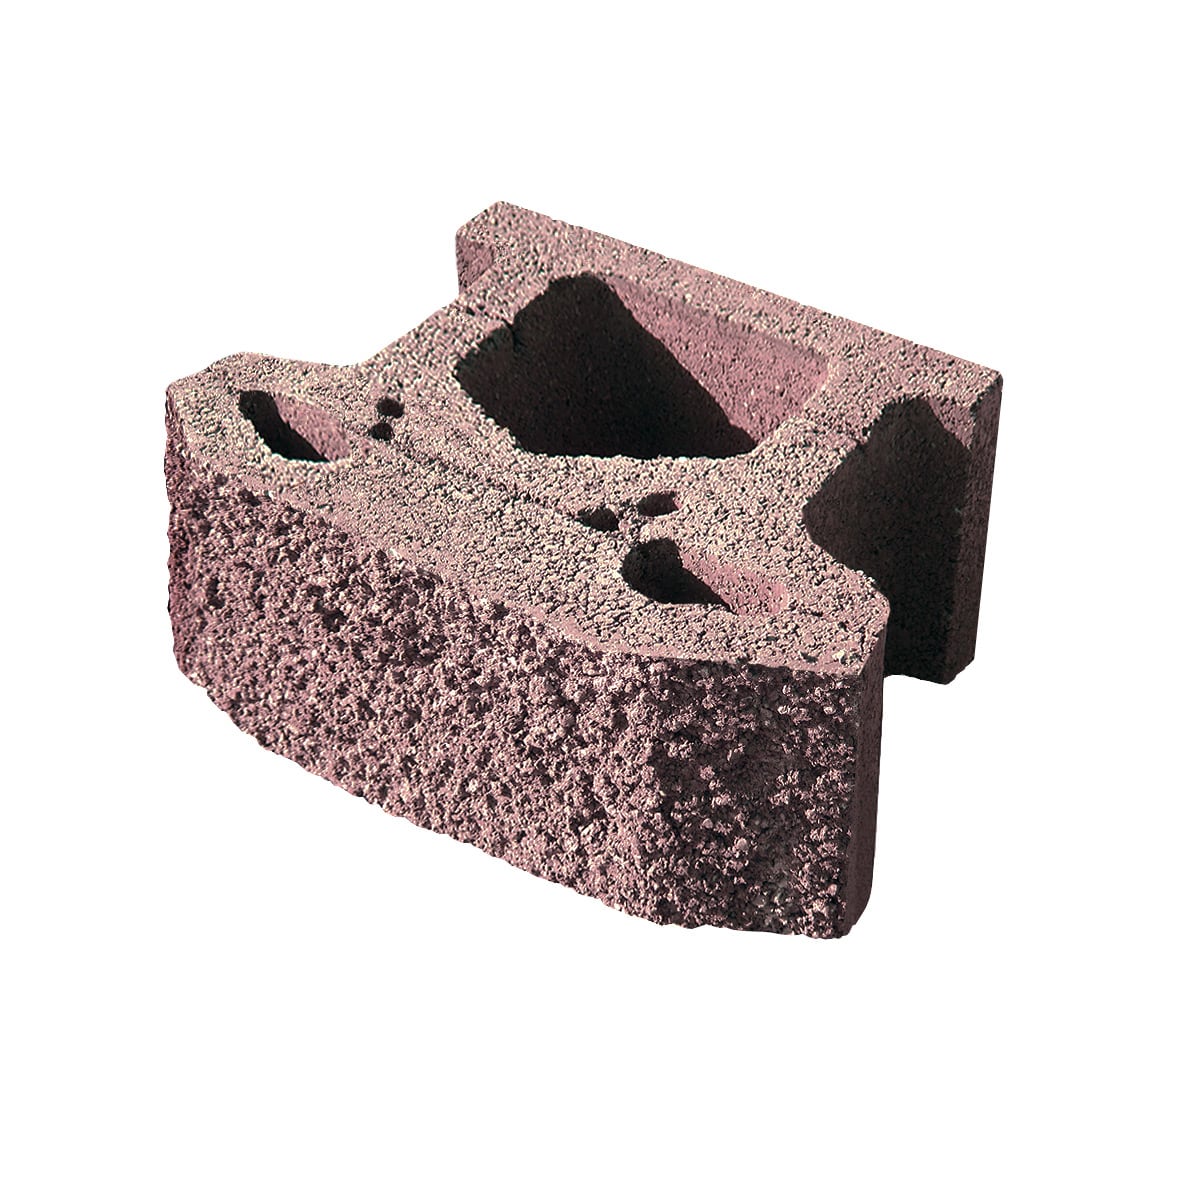 8-in H x 18-in L x 12-in D Rose Concrete Retaining Wall Block in Red | - Keystone KEYCO3R